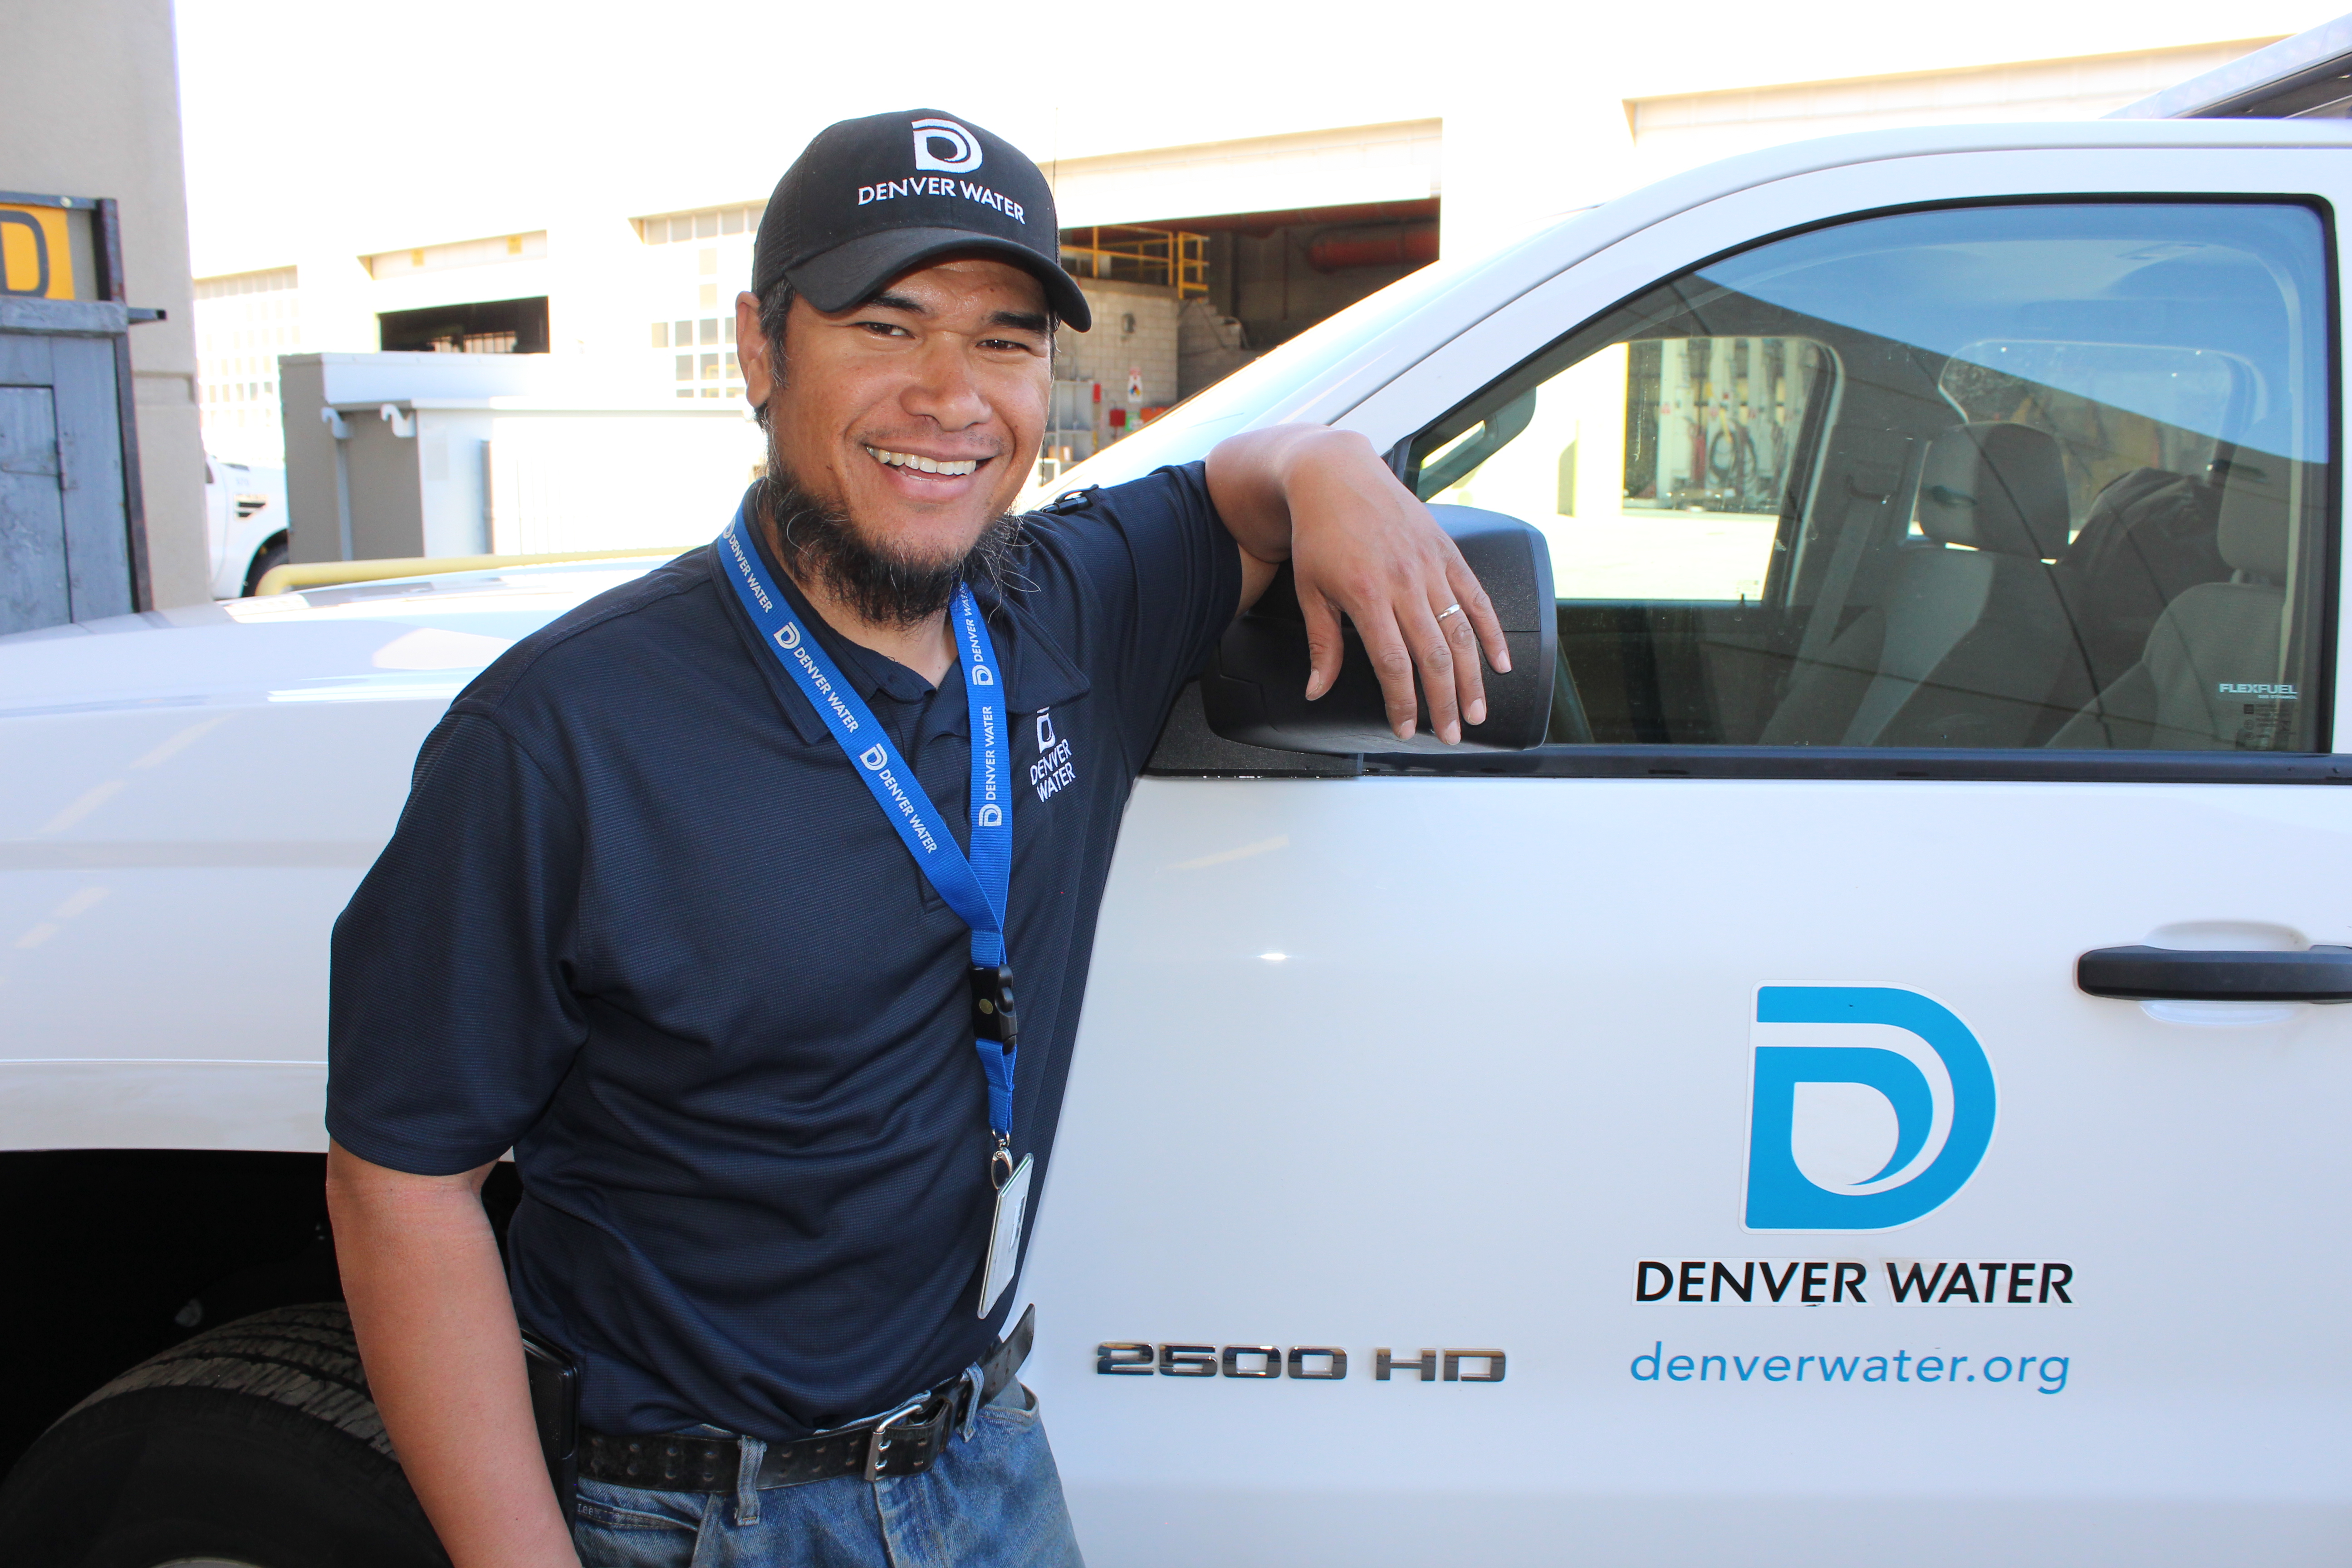 Homeowners should check for the Denver Water logo on vehicles, hats and clothing.